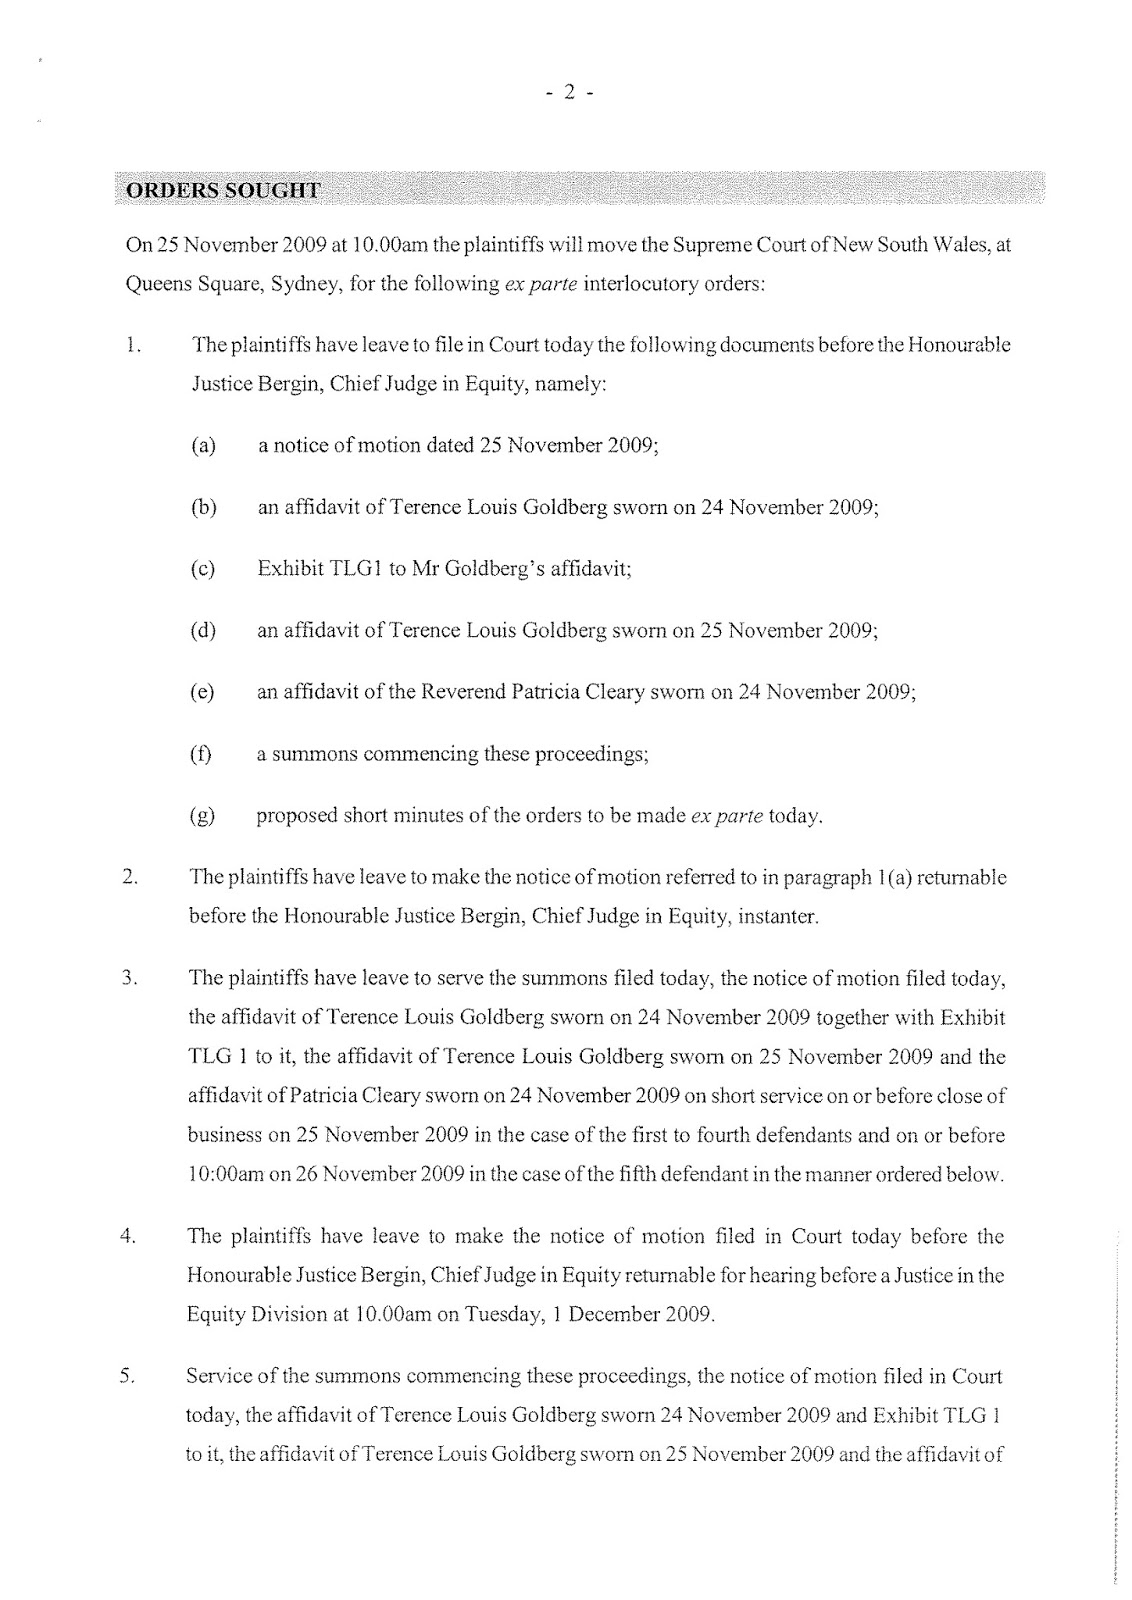 Notice of Motion in relation to proceedings 2009/00291458-001 (then 5454/2009)